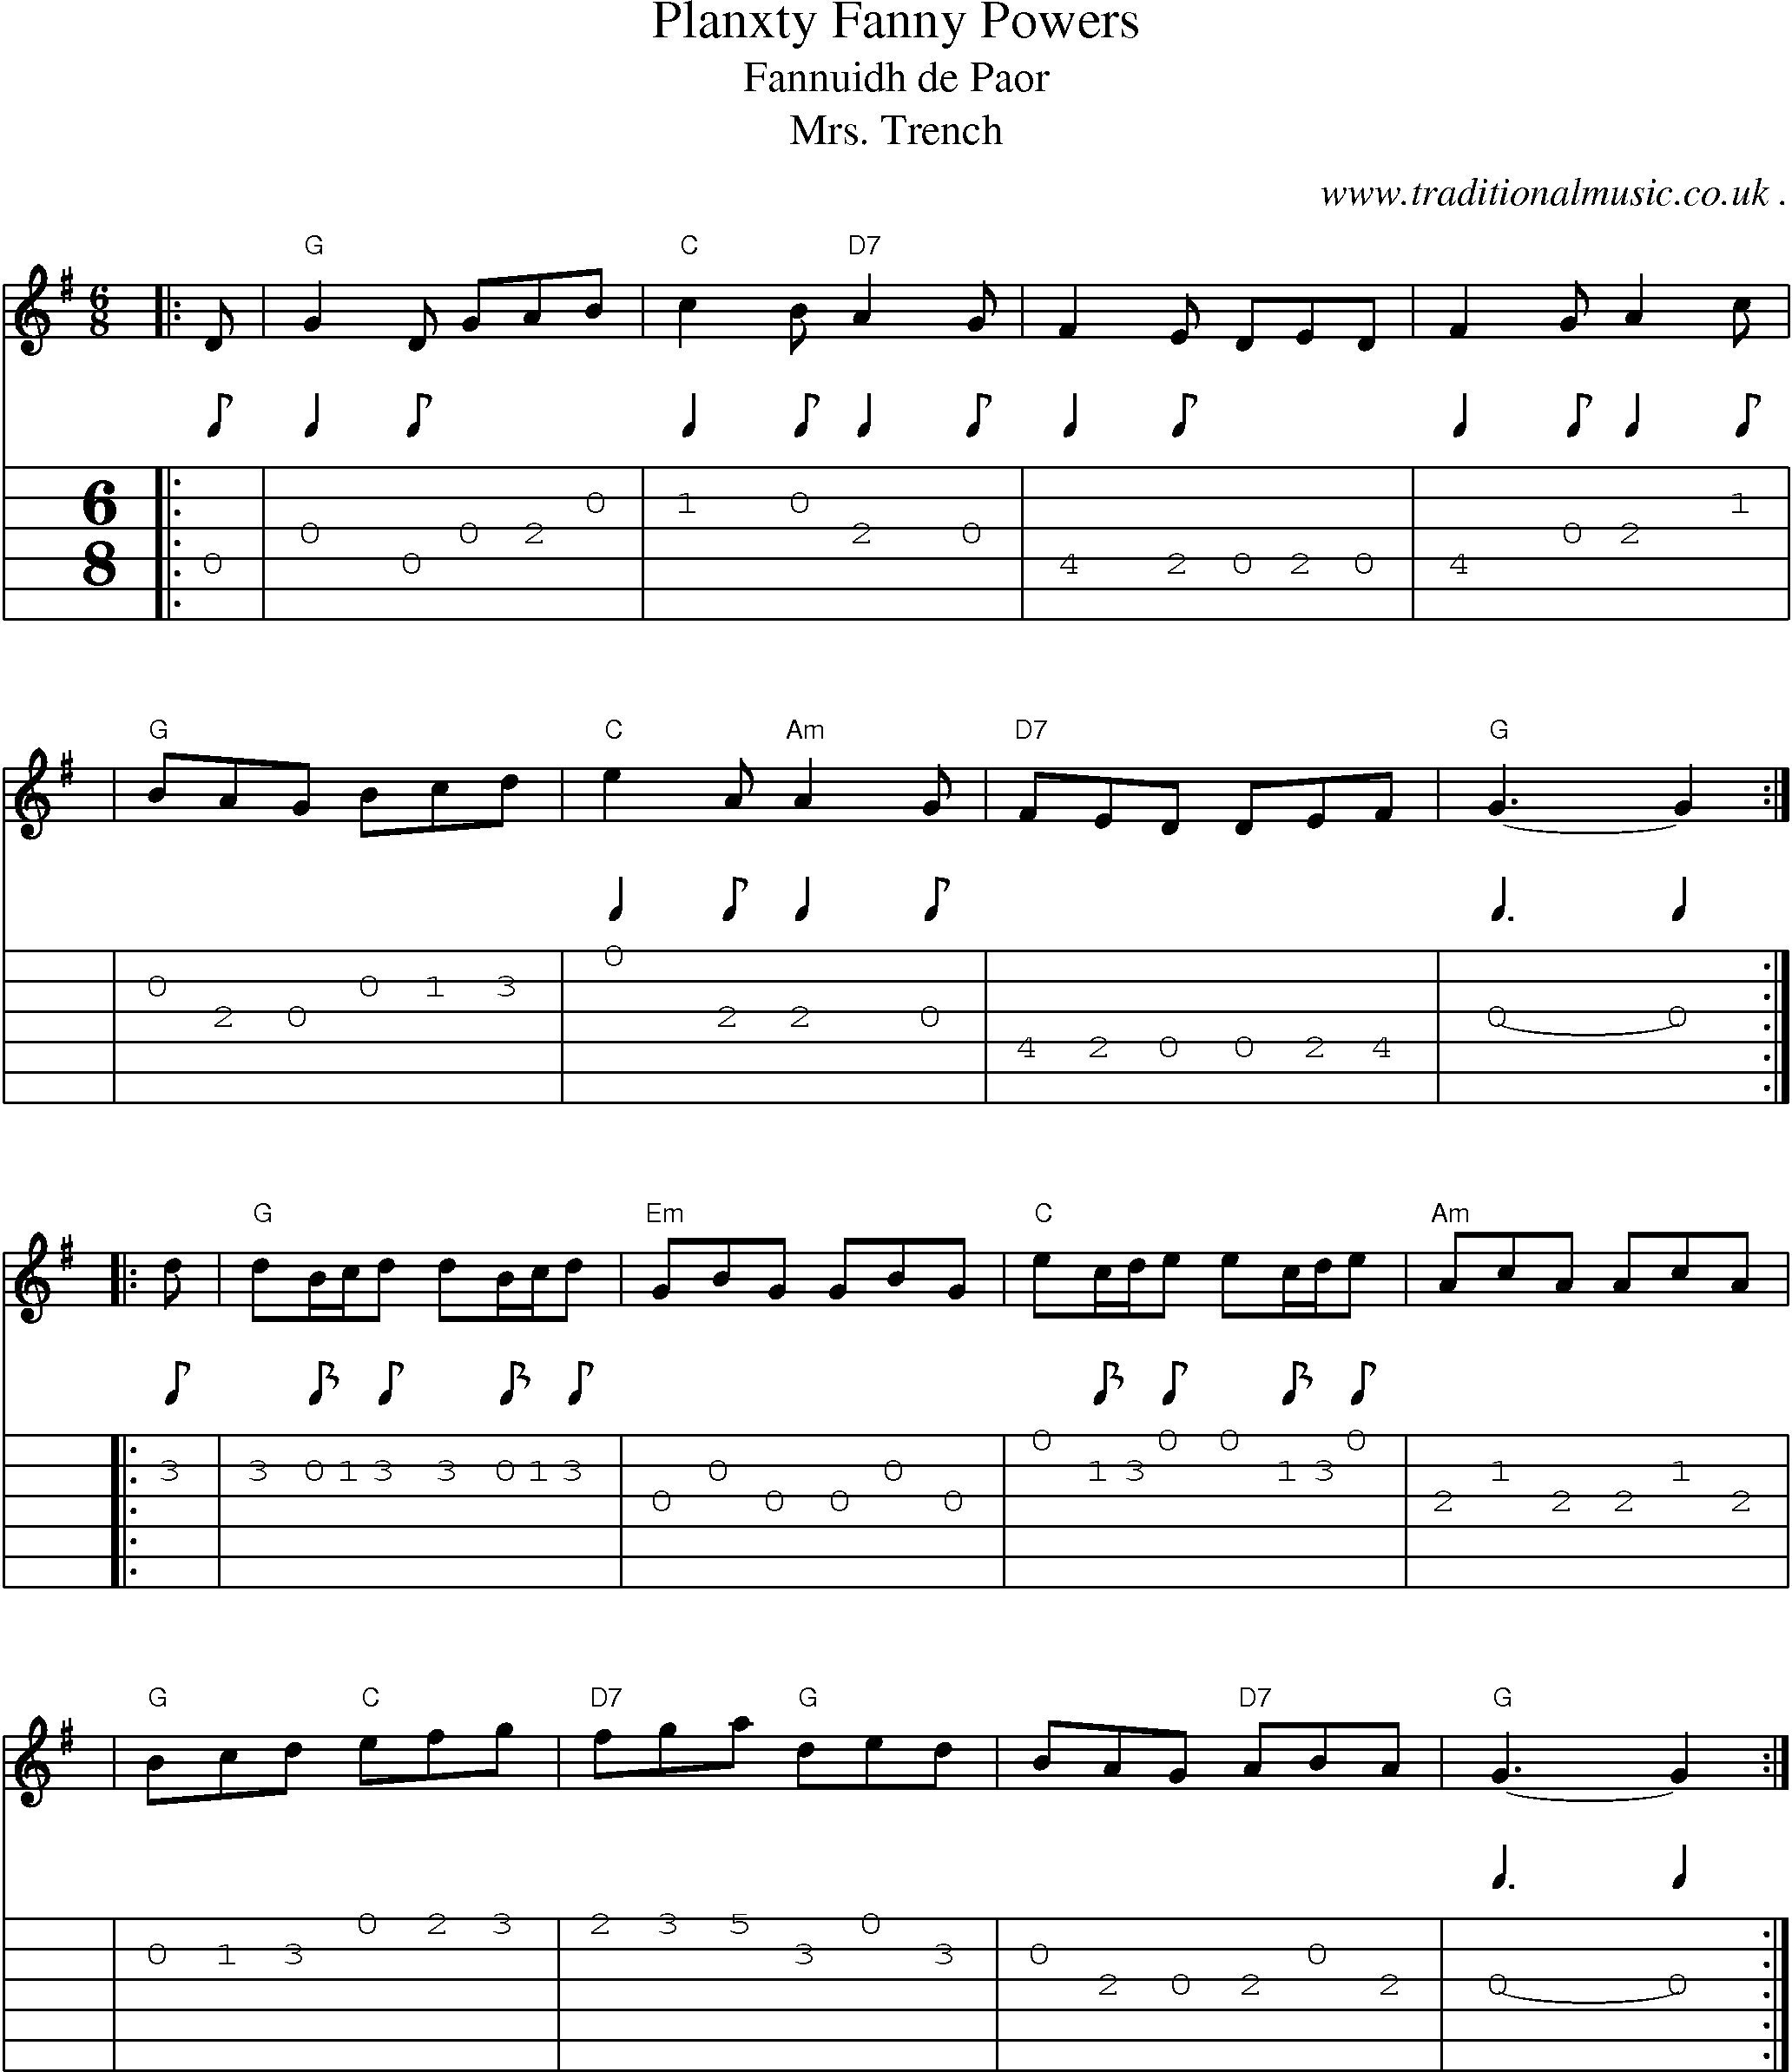 Sheet-music  score, Chords and Guitar Tabs for Planxty Fanny Powers